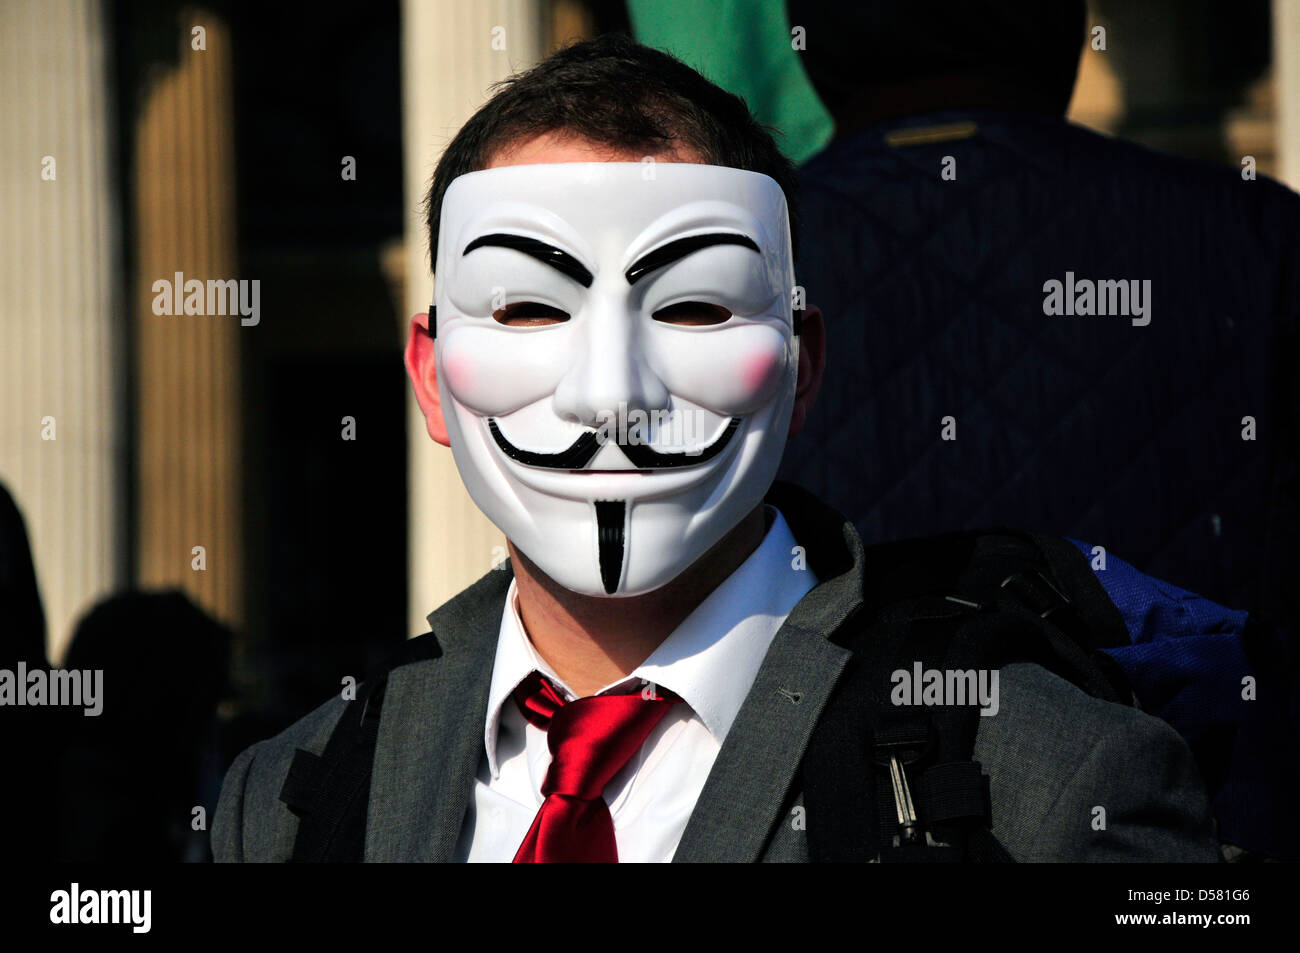 A man with a red tie wearing an anonymous mask at a rally in Trafalgar Square, London, UK Stock Photo